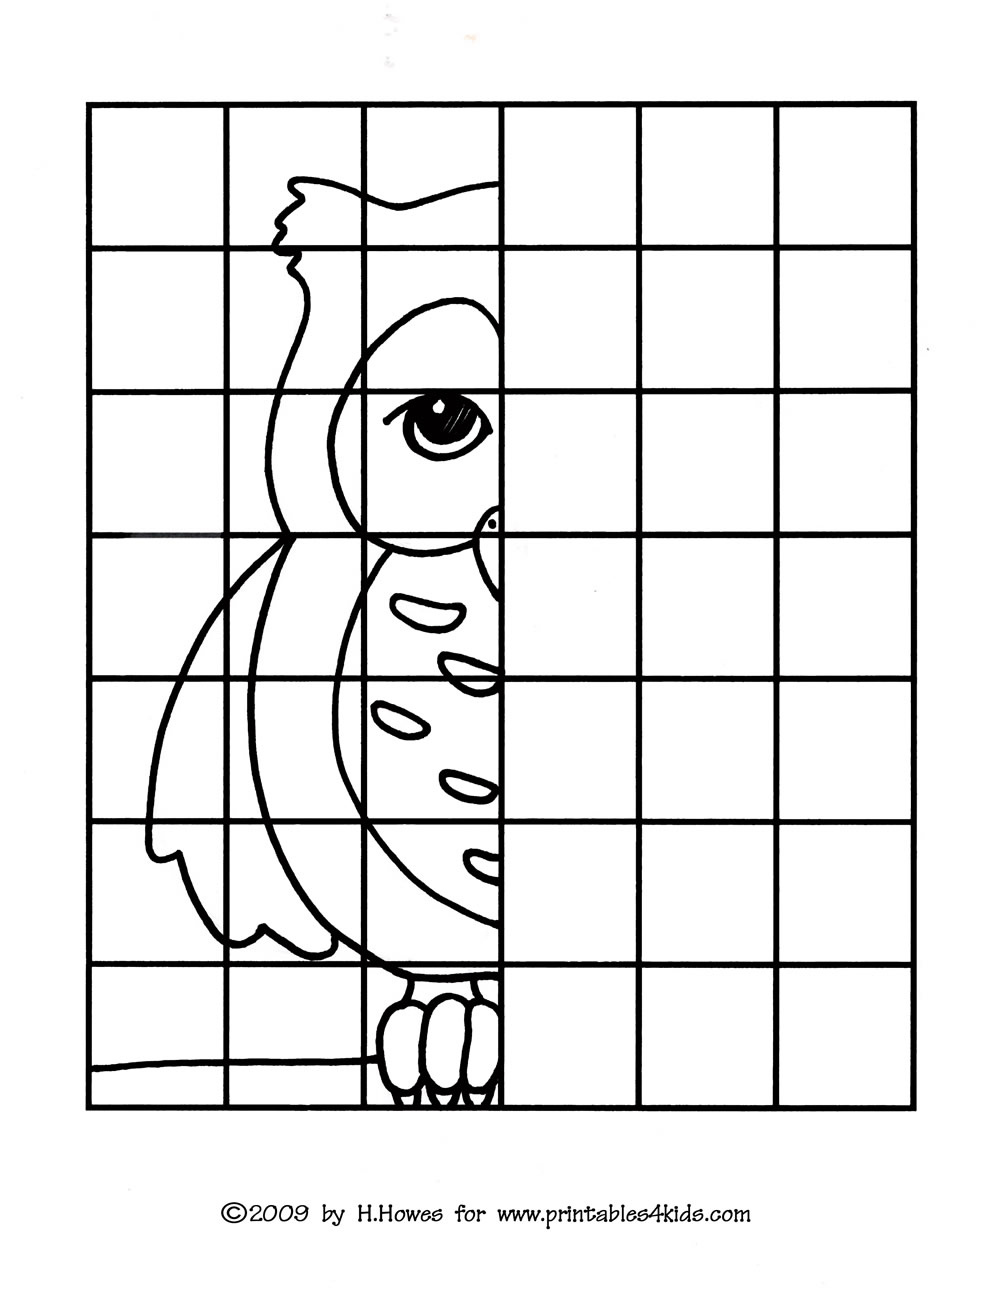 Easy Grid Drawing Worksheets At PaintingValley Explore Collection 